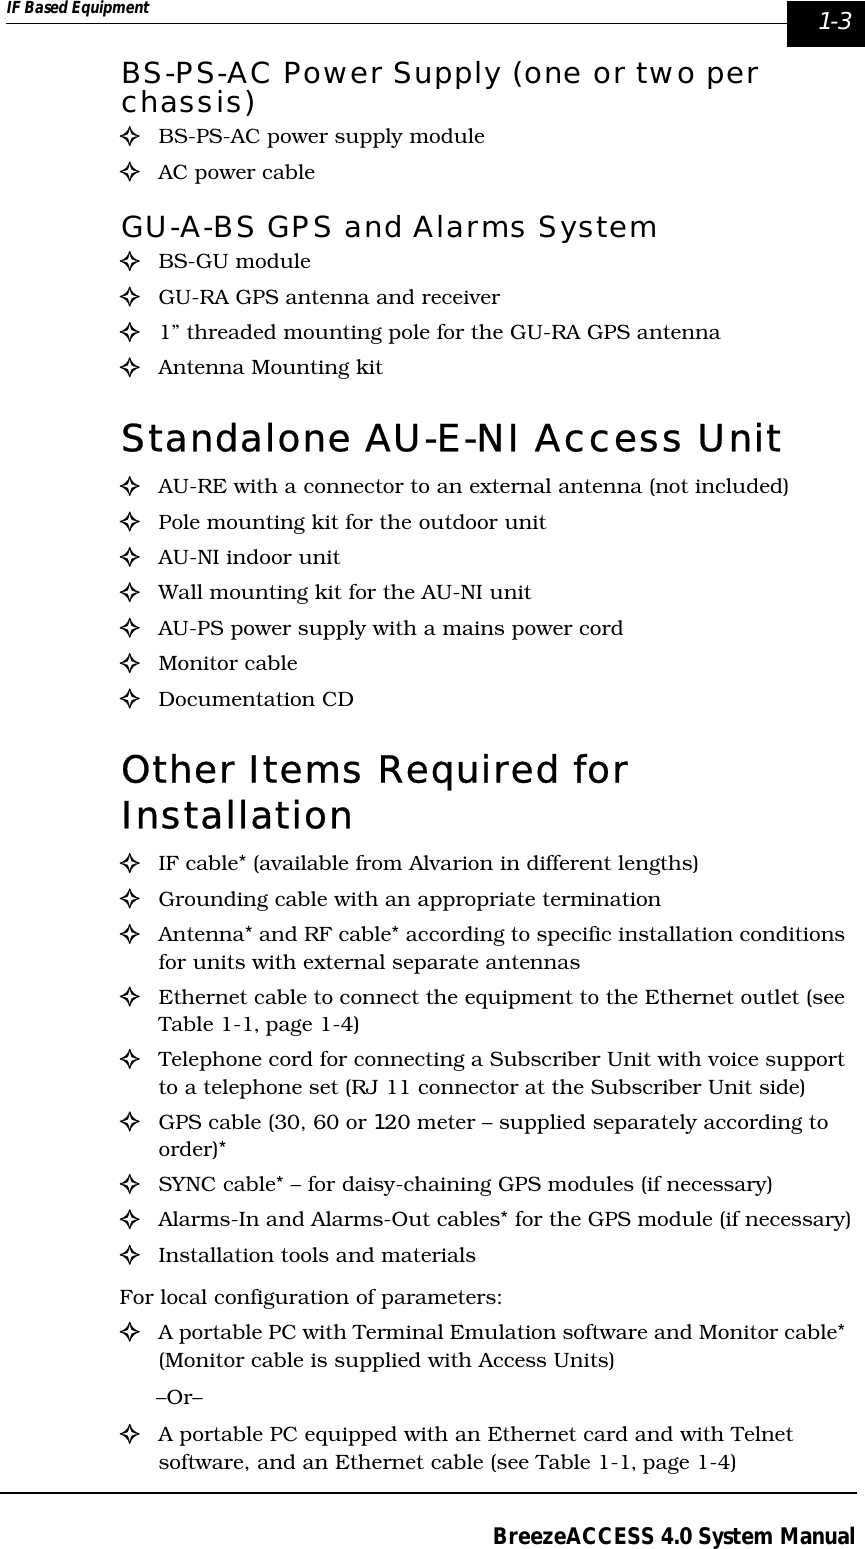 IF Based Equipment  1-3BreezeACCESS 4.0 System ManualBS-PS-AC Power Supply (one or two per chassis)!BS-PS-AC power supply module!AC power cableGU-A-BS GPS and Alarms System!BS-GU module!GU-RA GPS antenna and receiver!1” threaded mounting pole for the GU-RA GPS antenna!Antenna Mounting kitStandalone AU-E-NI Access Unit!  AU-RE with a connector to an external antenna (not included)!Pole mounting kit for the outdoor unit!AU-NI indoor unit!Wall mounting kit for the AU-NI unit!AU-PS power supply with a mains power cord!Monitor cable!Documentation CDOther Items Required for Installation !IF cable* (available from Alvarion in different lengths)!Grounding cable with an appropriate termination!Antenna* and RF cable* according to specific installation conditions for units with external separate antennas!Ethernet cable to connect the equipment to the Ethernet outlet (see Table 1-1‚ page 1-4)!Telephone cord for connecting a Subscriber Unit with voice support to a telephone set (RJ 11 connector at the Subscriber Unit side)!GPS cable (30, 60 or 120 meter – supplied separately according to order)*!SYNC cable* – for daisy-chaining GPS modules (if necessary)!Alarms-In and Alarms-Out cables* for the GPS module (if necessary)!Installation tools and materialsFor local configuration of parameters: !A portable PC with Terminal Emulation software and Monitor cable* (Monitor cable is supplied with Access Units) –Or–!A portable PC equipped with an Ethernet card and with Telnet software, and an Ethernet cable (see Table 1-1‚ page 1-4)